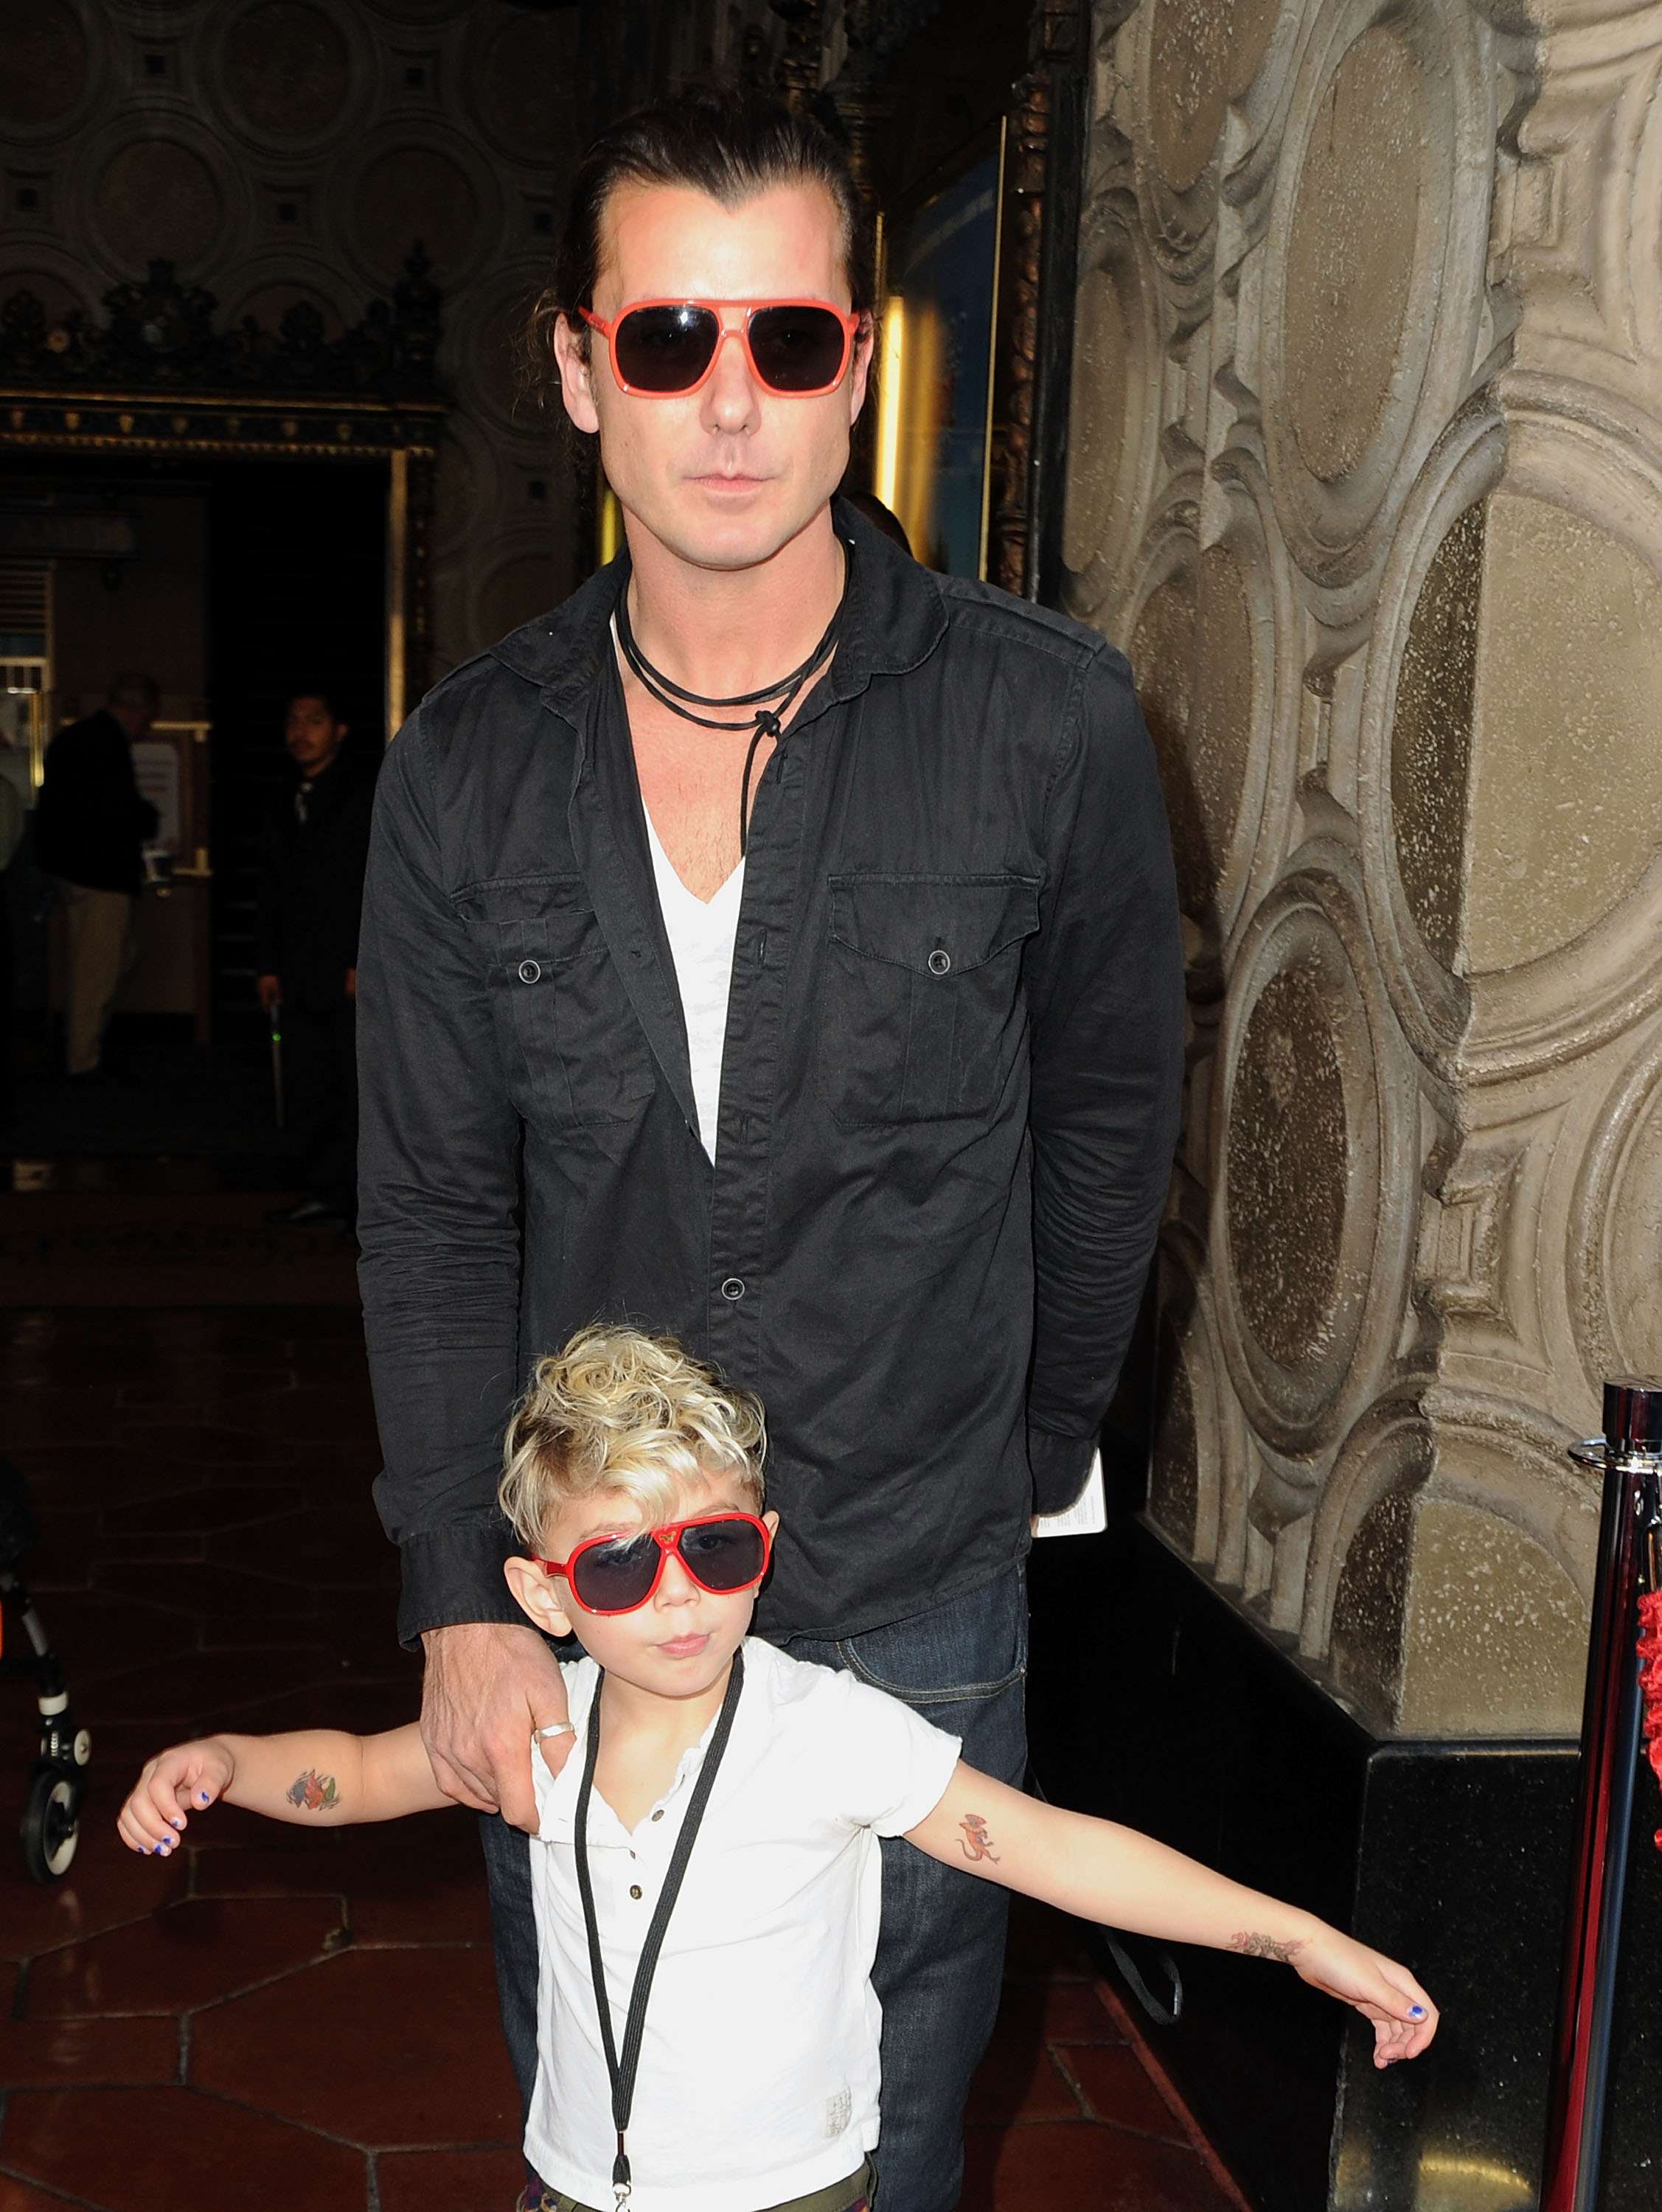 Gavin and Kingston Rossdale at the premiere of "Gnomeo and Juliet" in Hollywood, California on  January 23, 2011 | Source: Getty Images